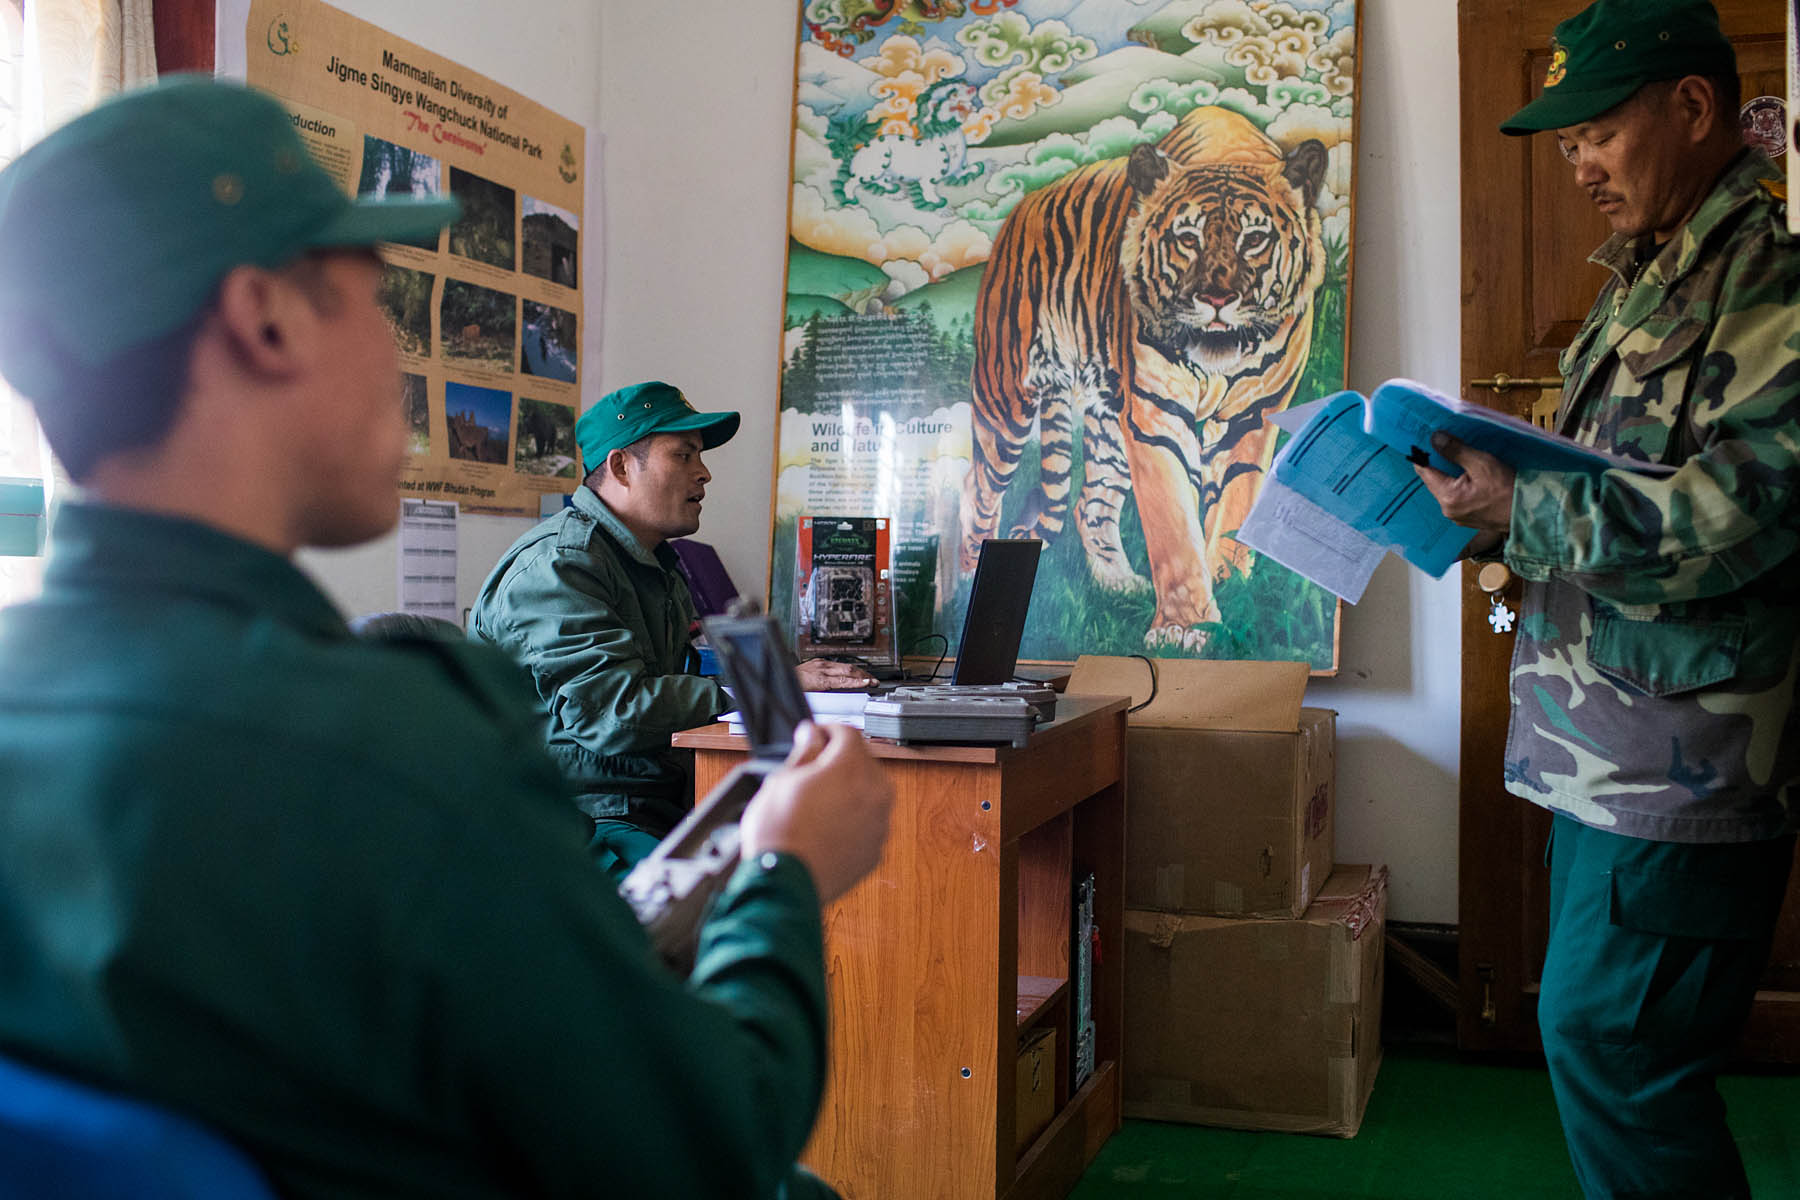 Rangers in the Jime Singye National Park office are studying camera trap data.